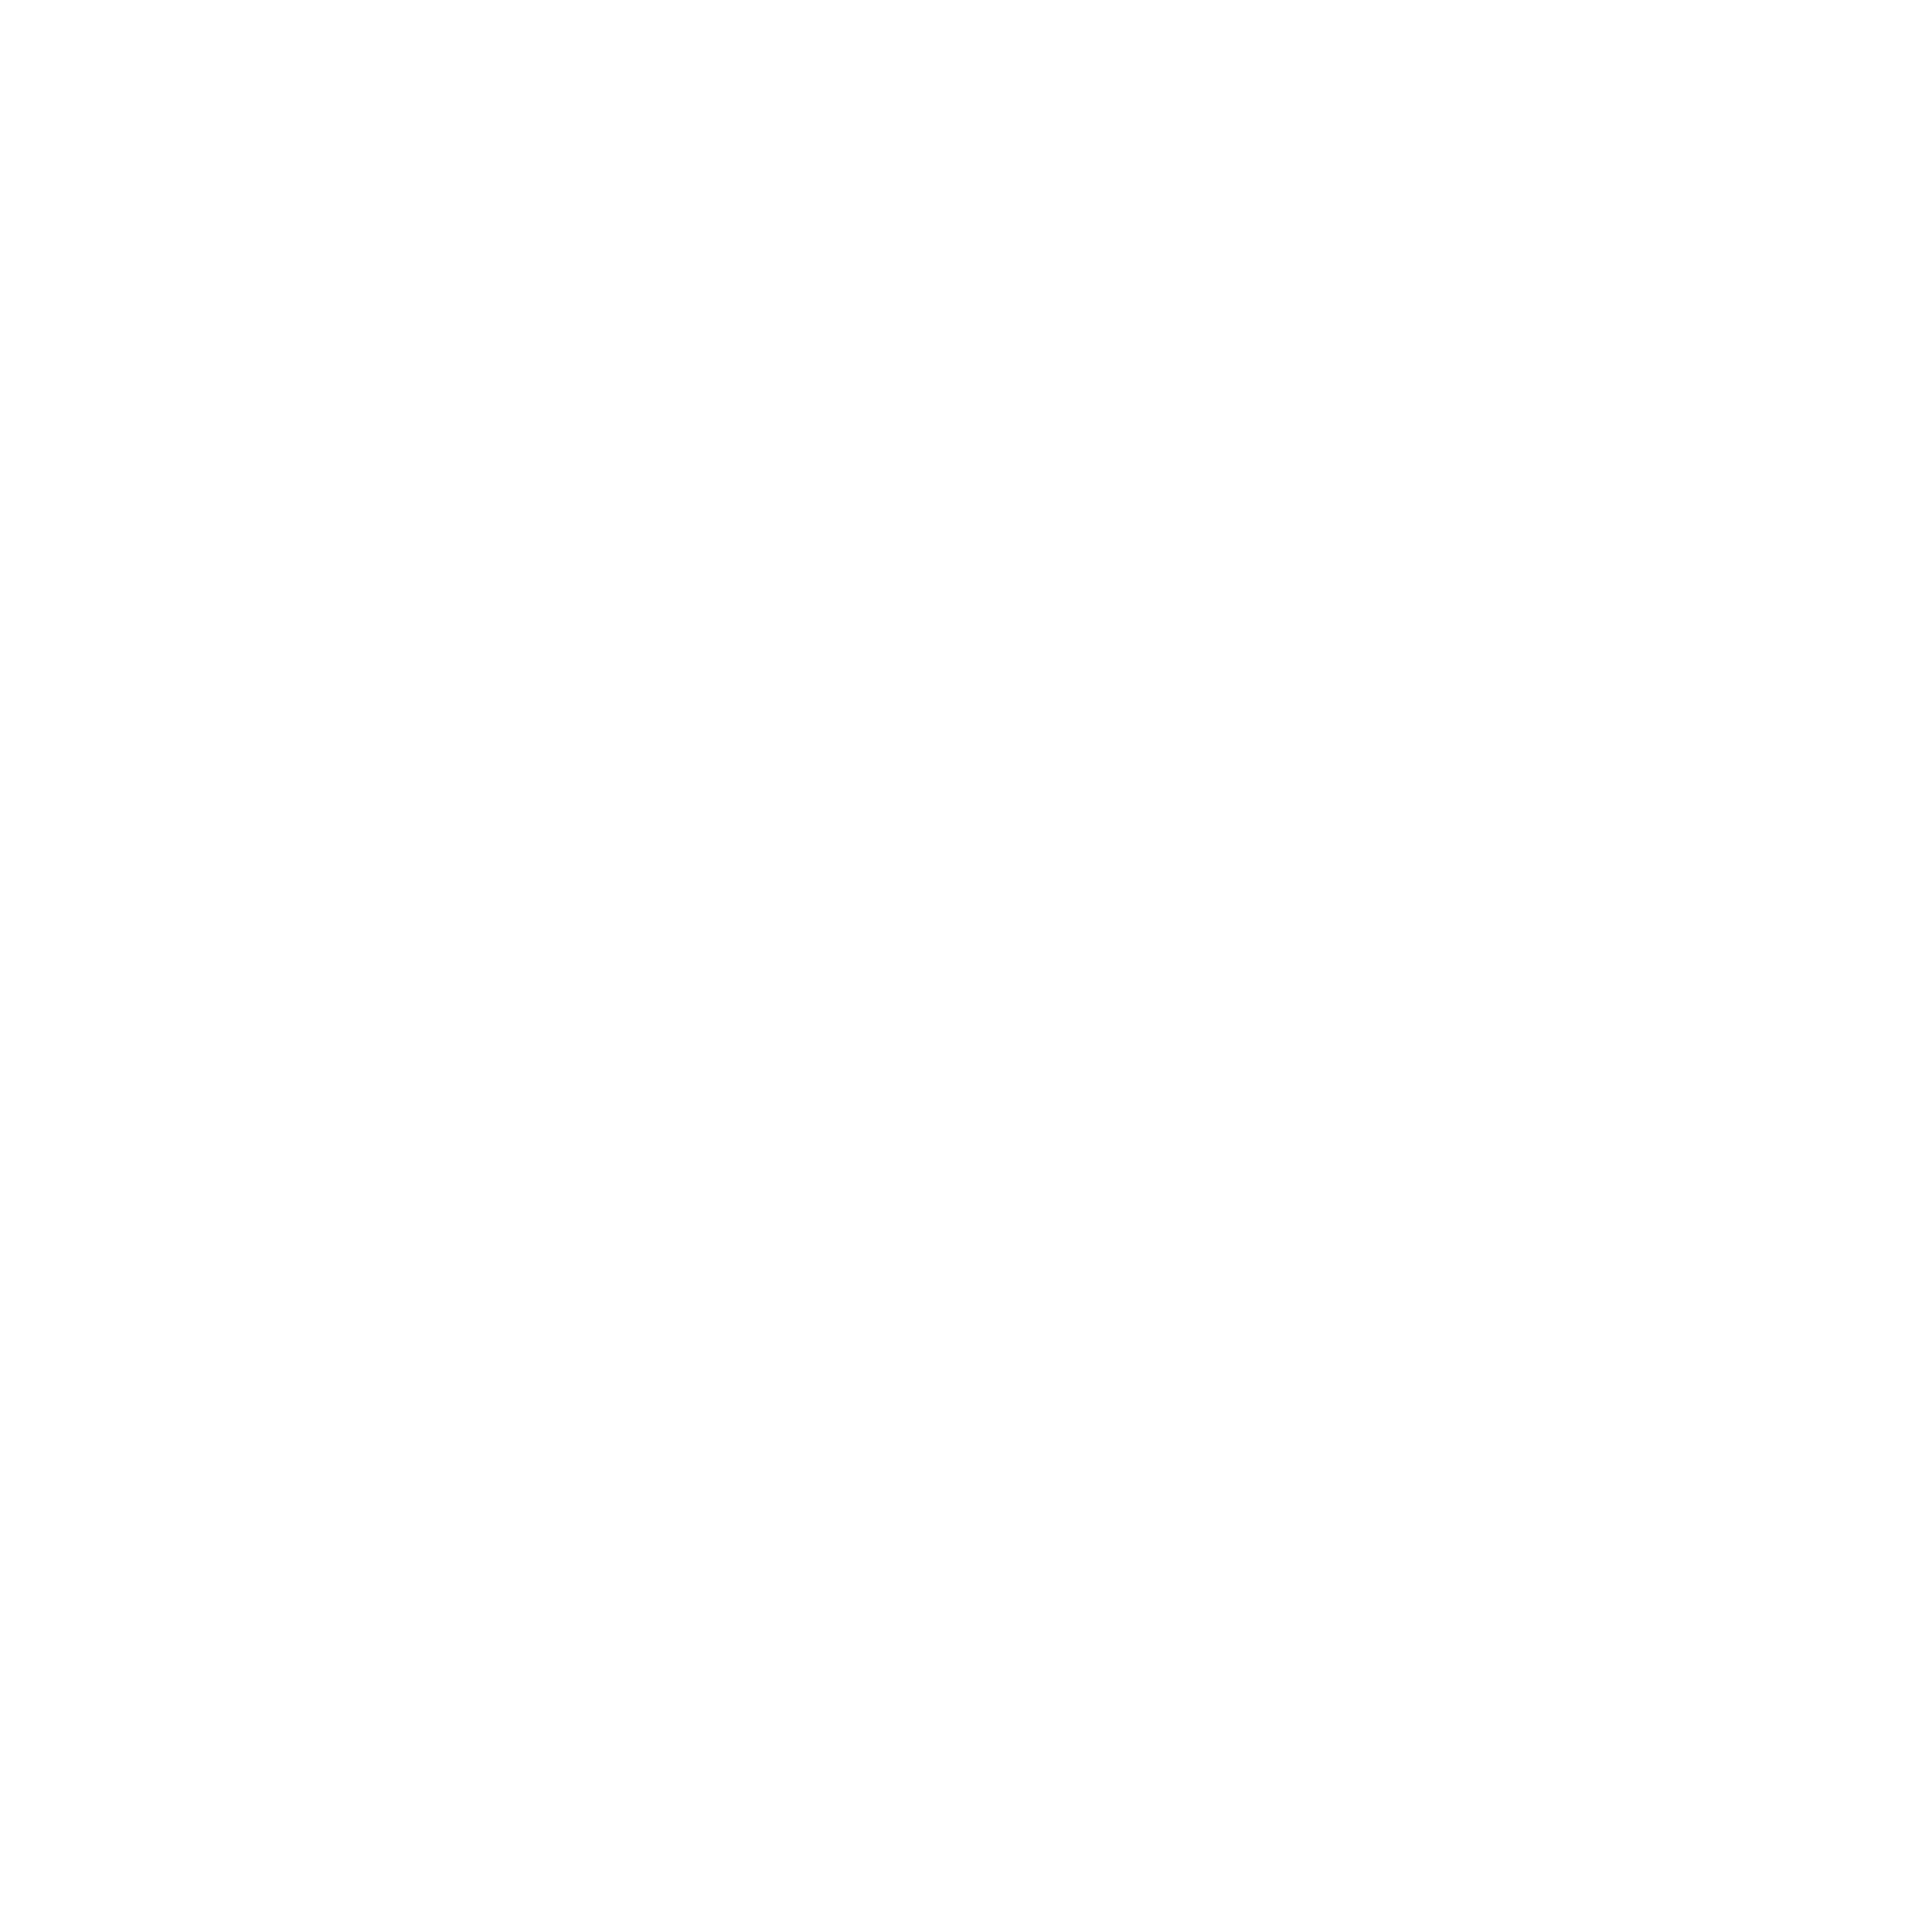 https://smallbusinessbc.ca/awards/wp-content/uploads/2023/05/SBBC_Awards_NomineeLogos-Discovery-Fabrics.png